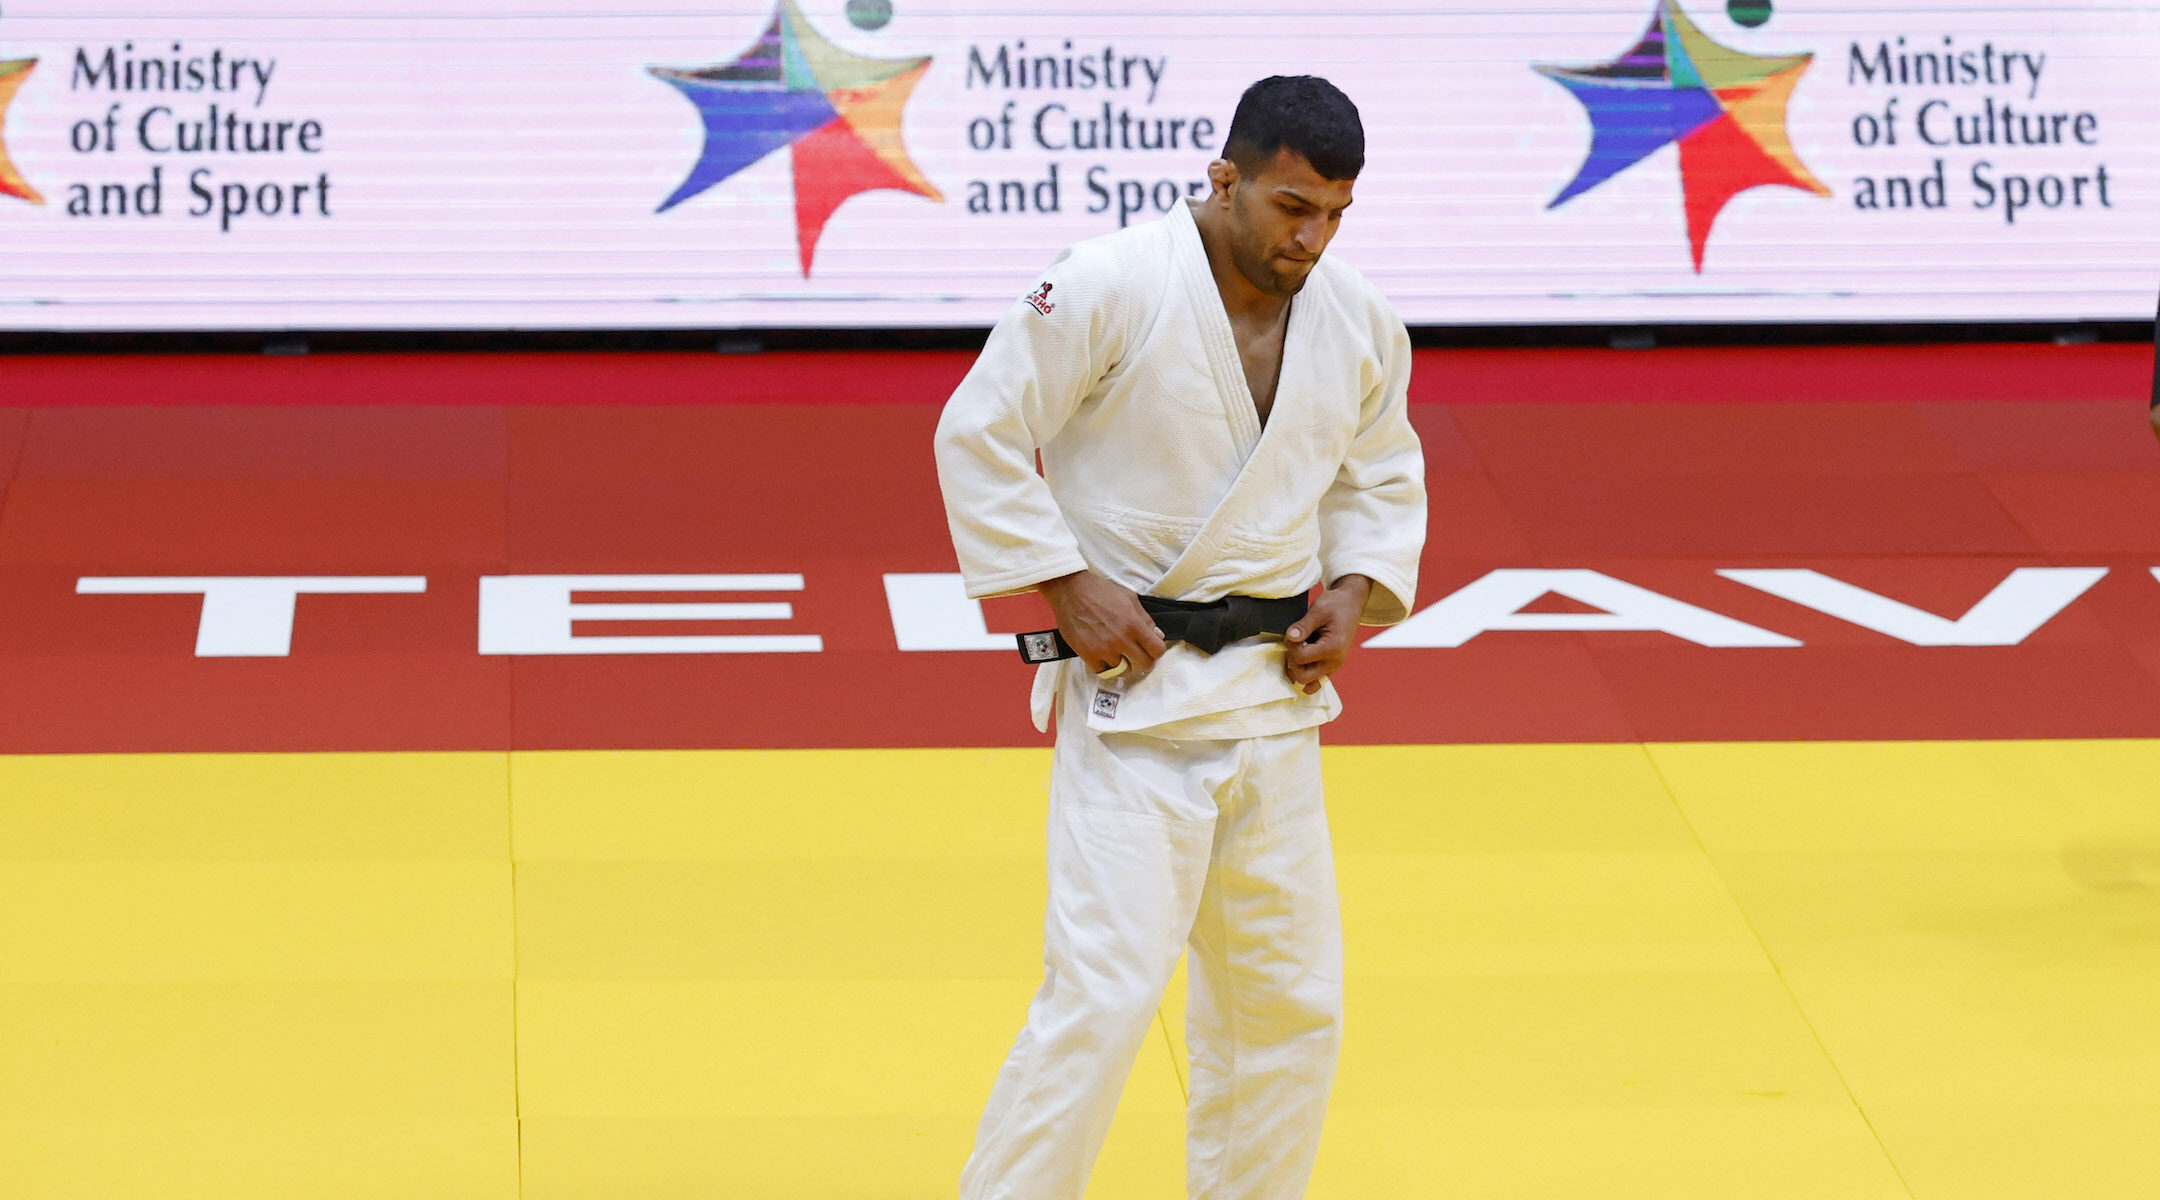 You are currently viewing Iran’s judo team suspended from international matches until 2023 for refusing to face Israeli opponents